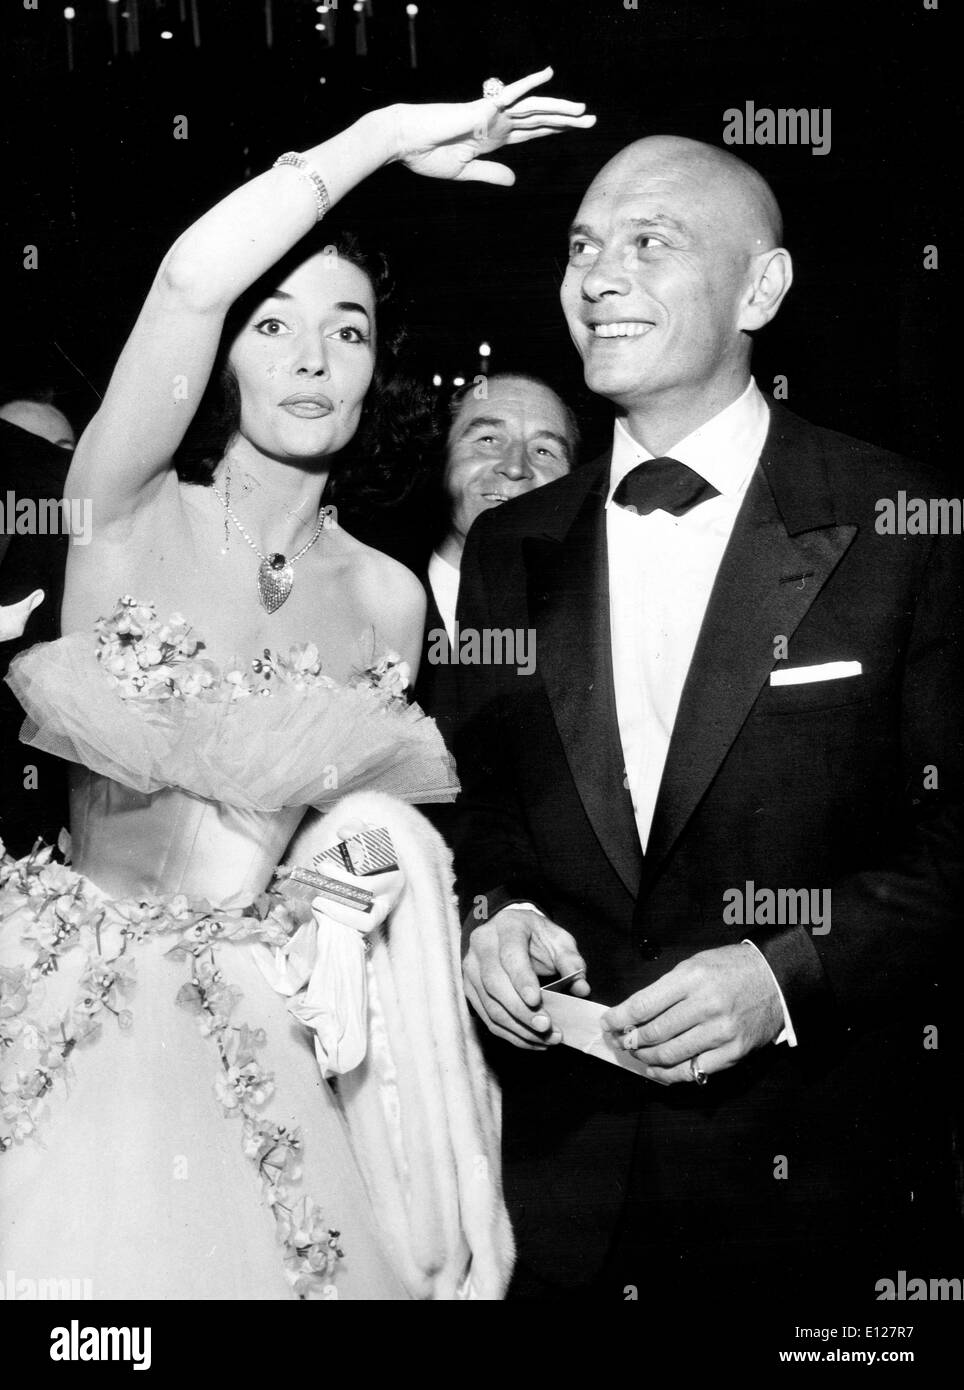 Apr 01, 2009 - London, England, United Kingdom - Yul Brynner (July 11, 1920 Ð October 10, 1985) was a Russian-born actor of stage and film, perhaps best known for his portrayal of the Siamese king in the Rodgers & Hammerstein musical The King and I on both stage and screen, as well as Rameses II in the 1956 Cecil B. DeMille film The Ten Commandments and as Chris Adams in The Magnificent Seven. (Credit Image: KEYSTONE Pictures USA/ZUMAPRESS.com) Stock Photo